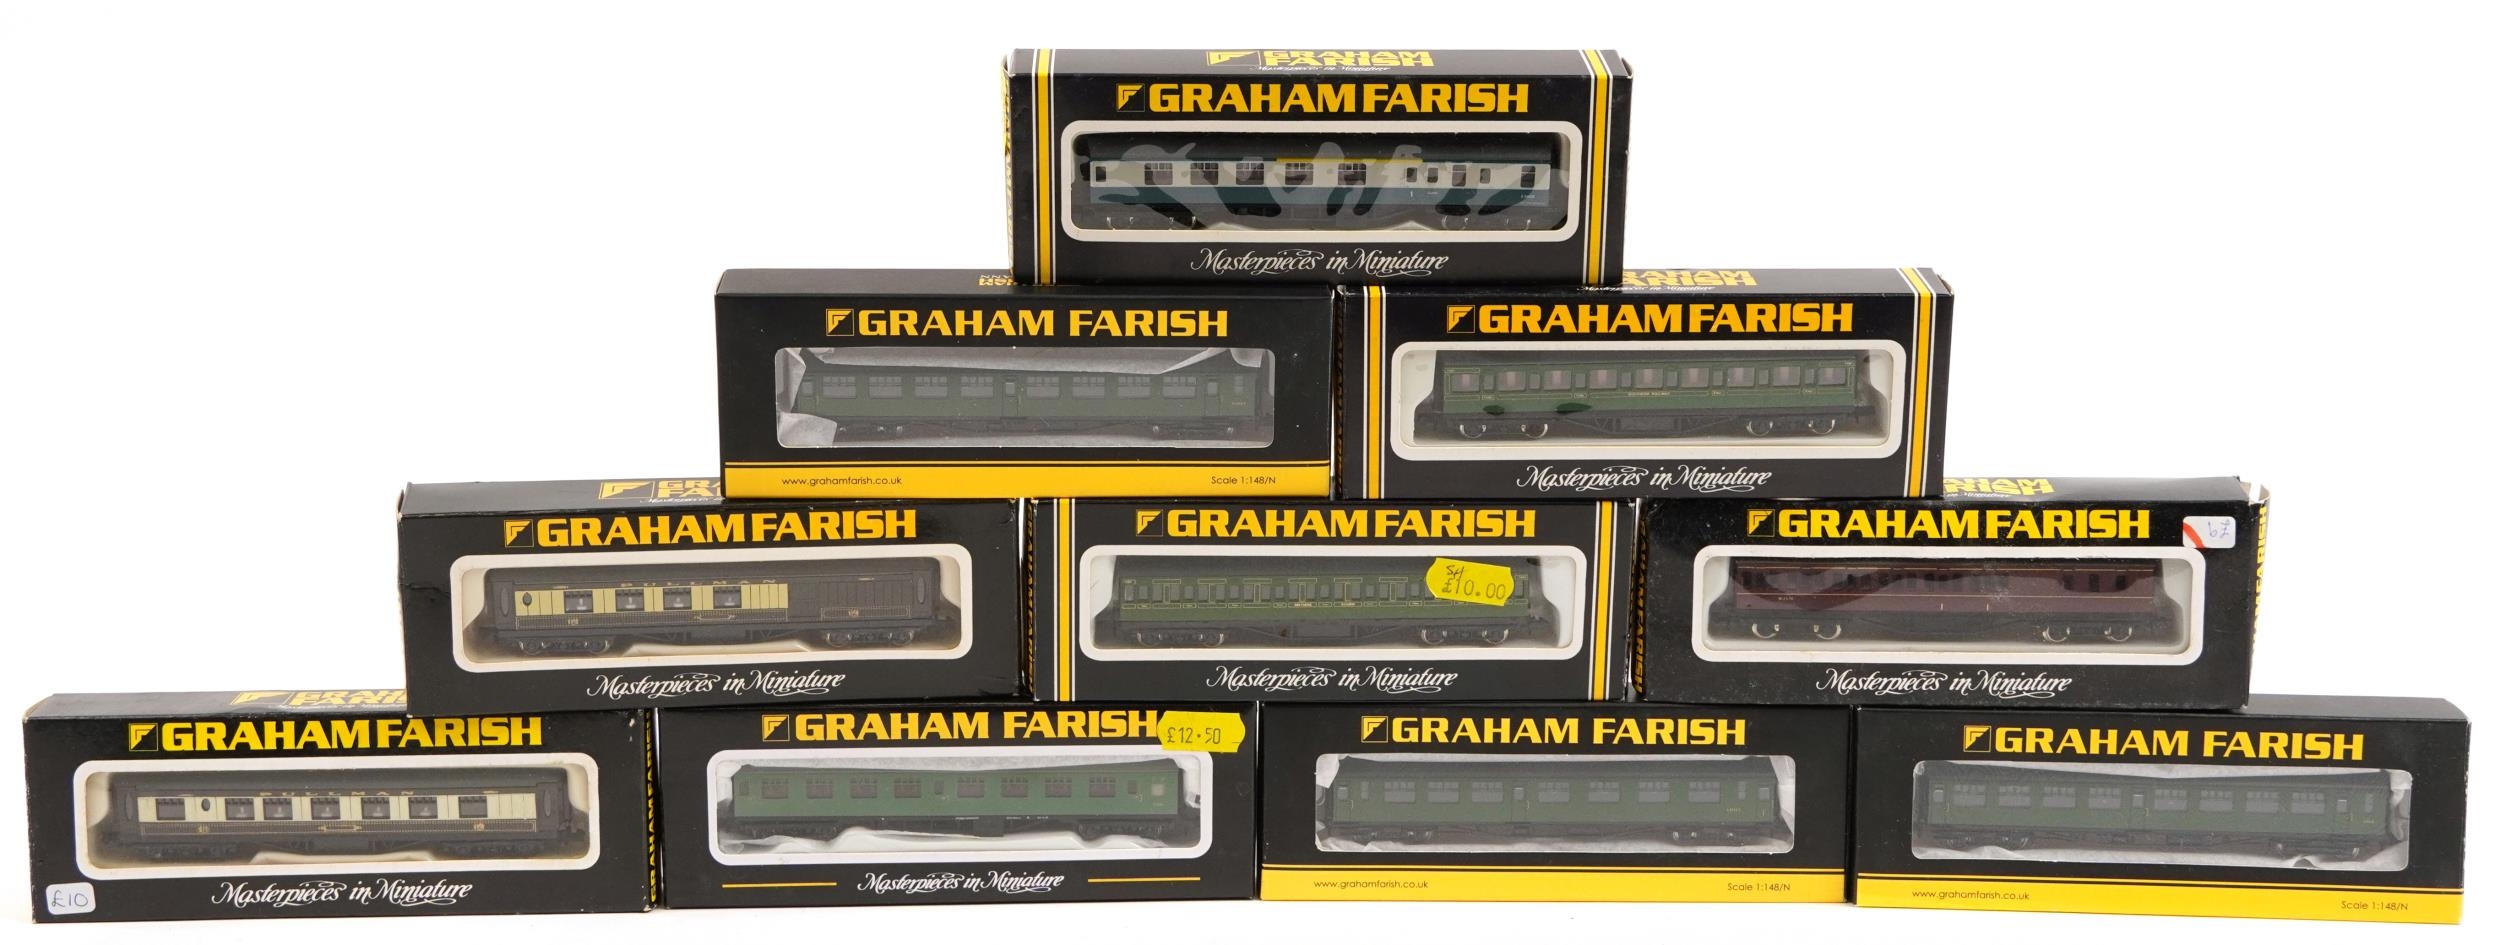 Ten Graham Farish N gauge model railway carriages with boxes, numbers 0603, 0615, 0623, 0646,